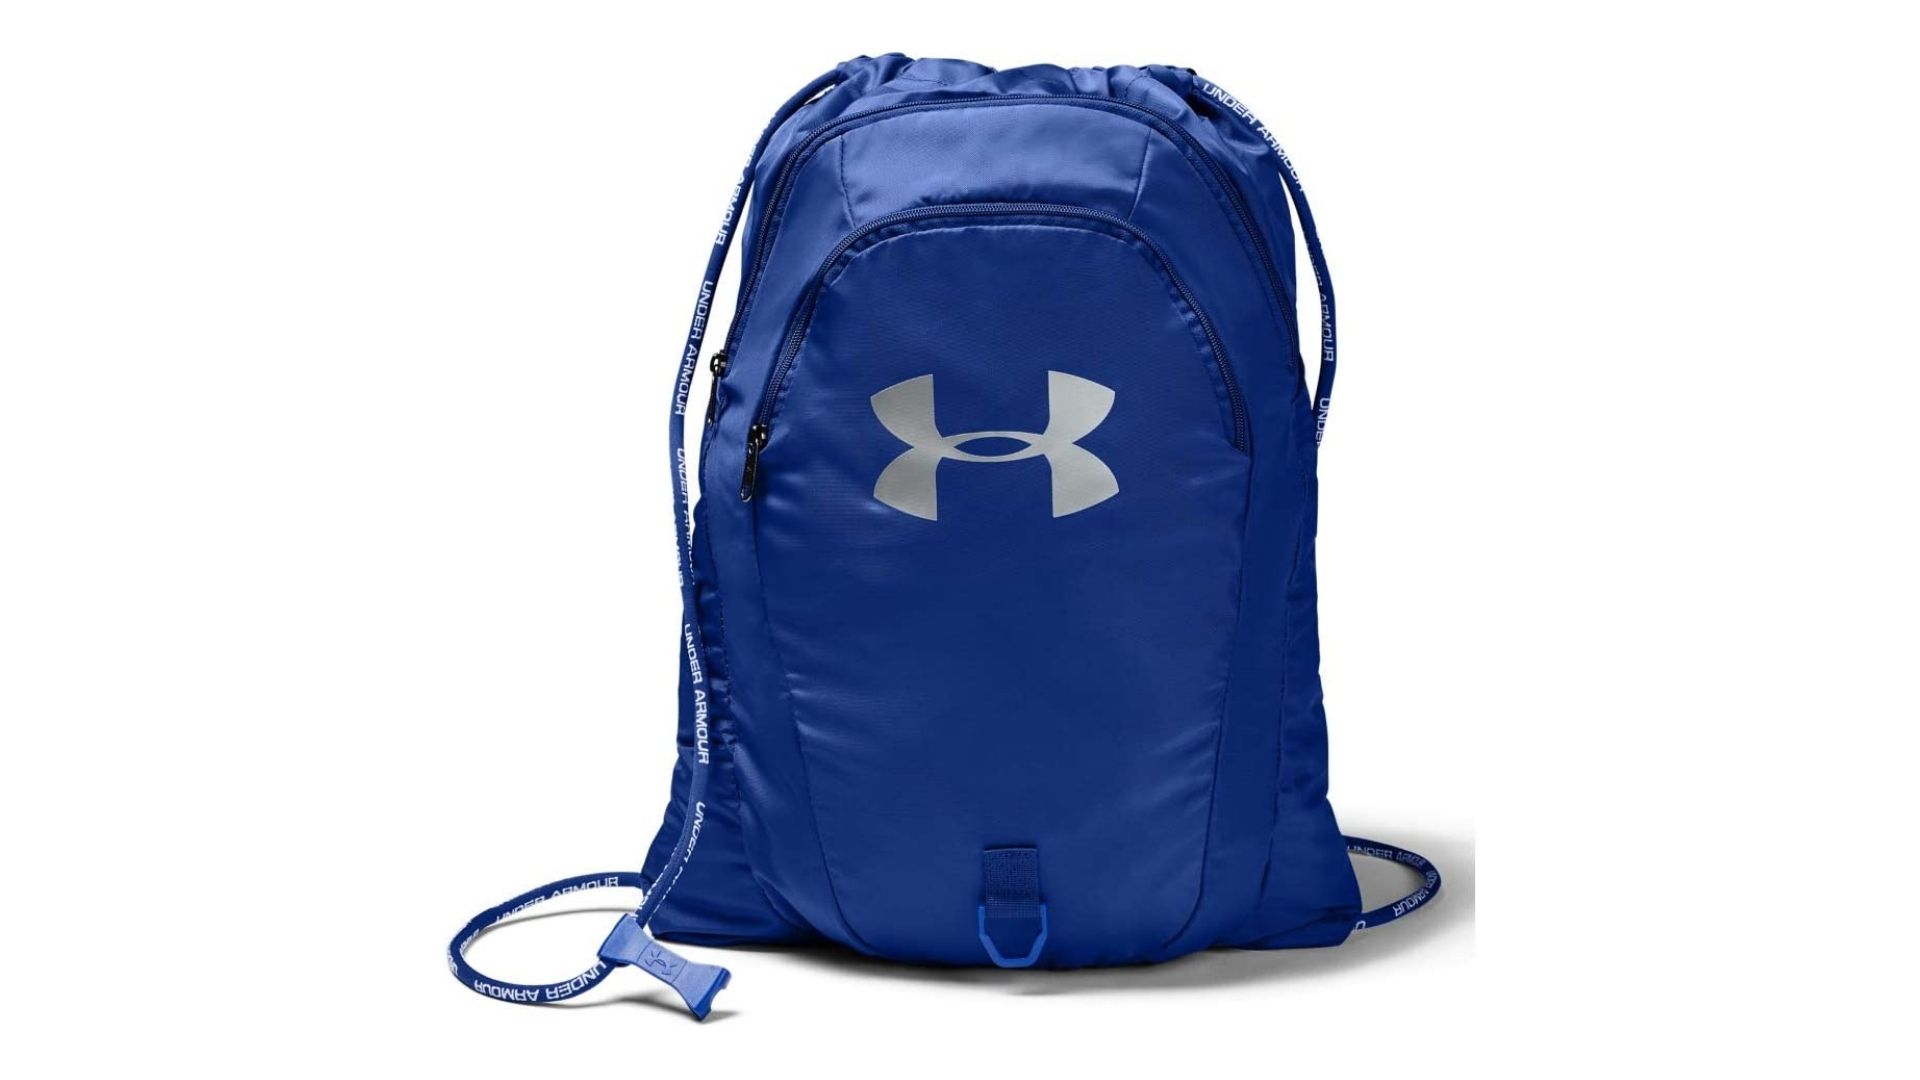 Buy Under Armour Unisex Graphic 20 Gym Bag Drawstring Bags at Amazonin